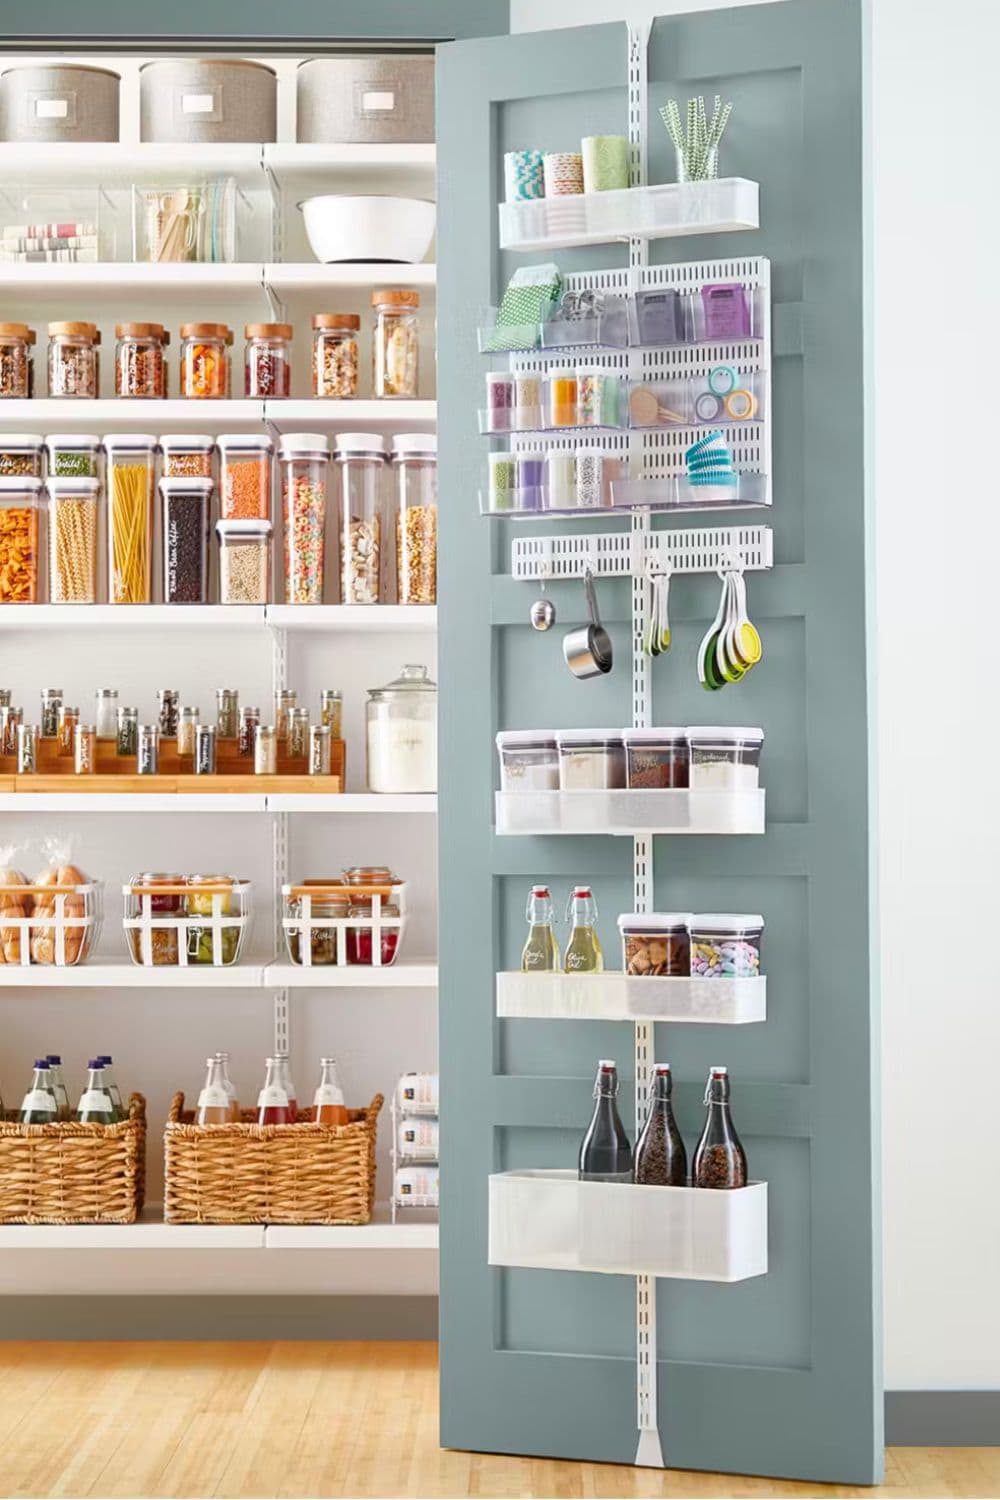 A metal organizer with shelves mounted to the inside of a pantry door to store items.